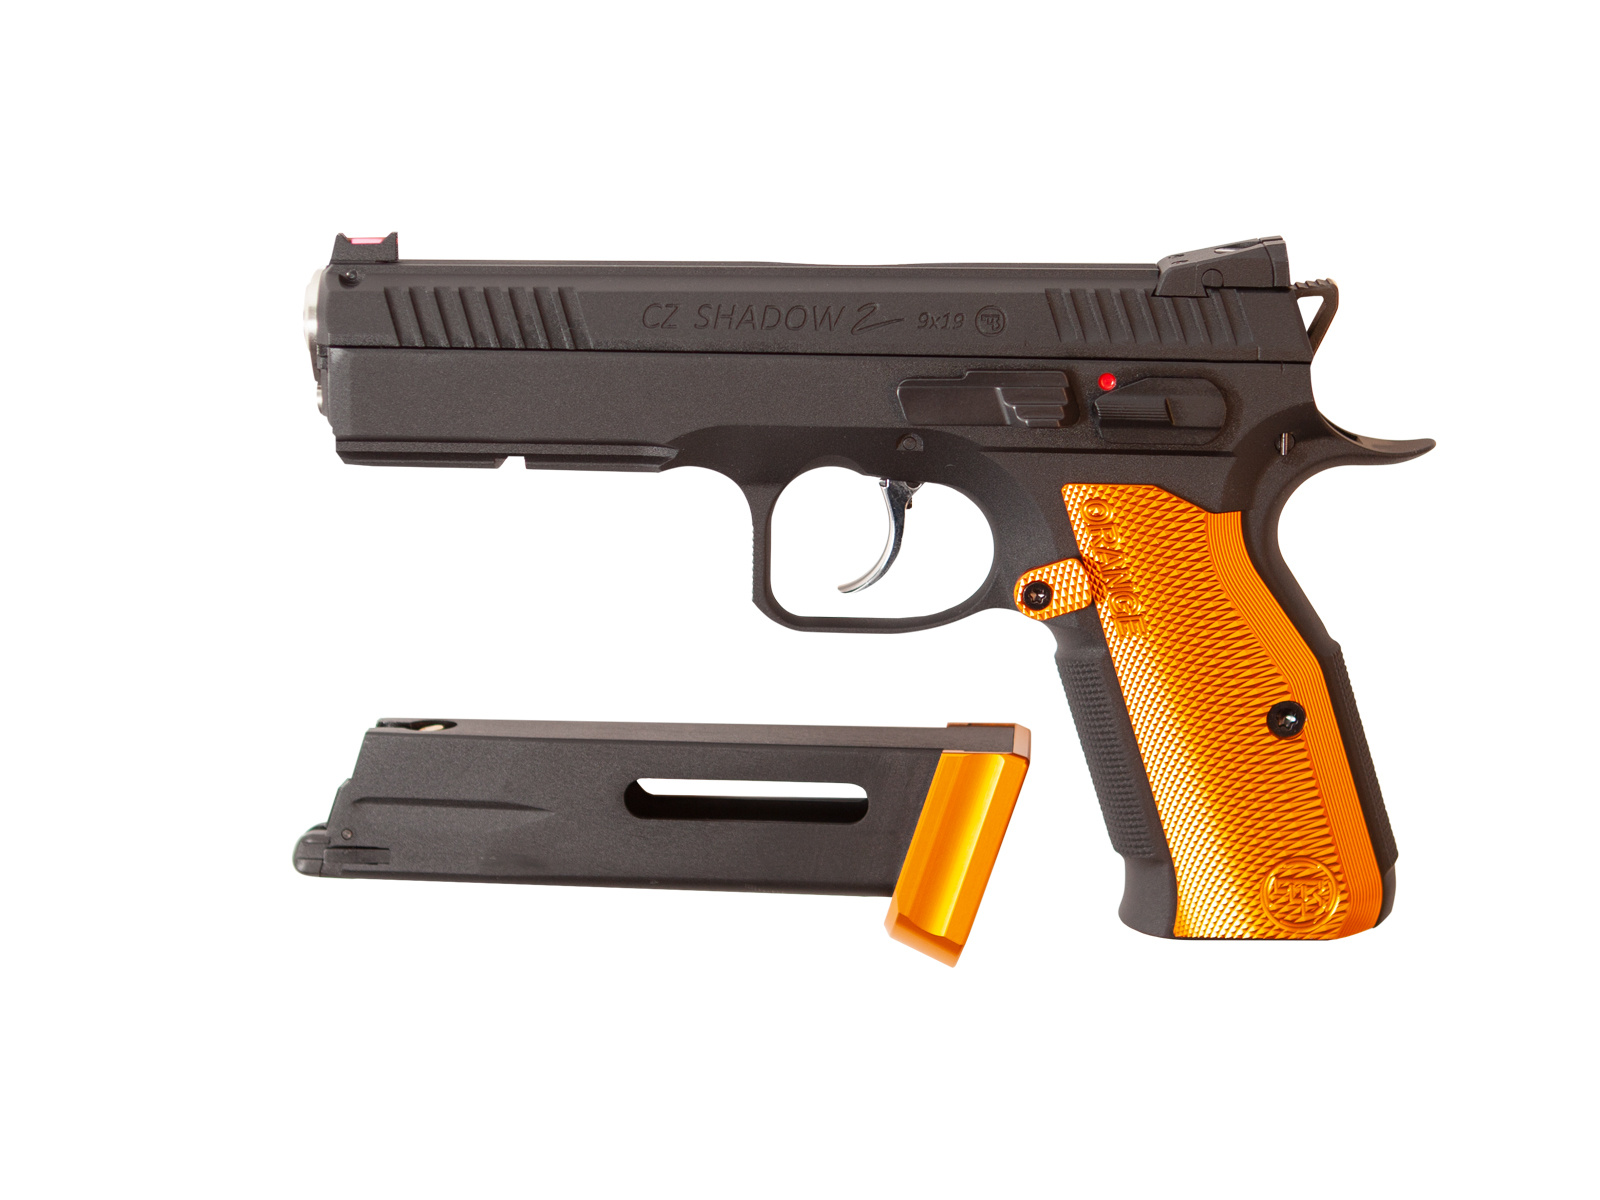 ASG ASG CZ 75 Shadow 2 Co2 GBB 1.0 Joule - Orange Special Edition